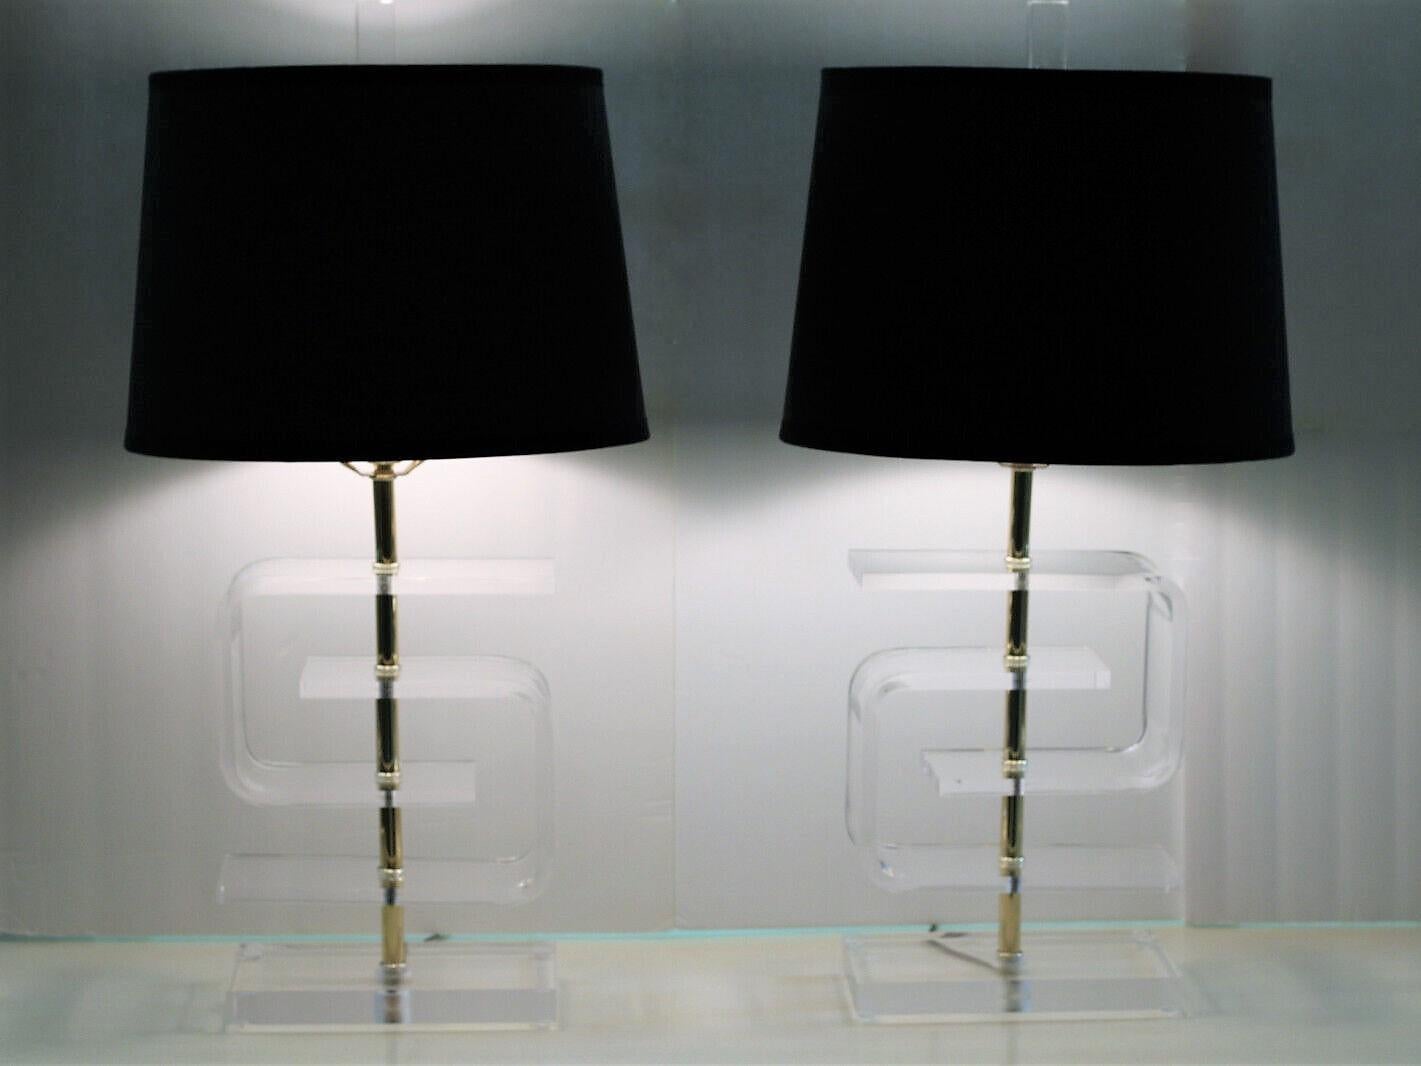 Pair of Vintage Greek Key Lucite Table Lamps in the Style of Les Prismatiques For Sale 10